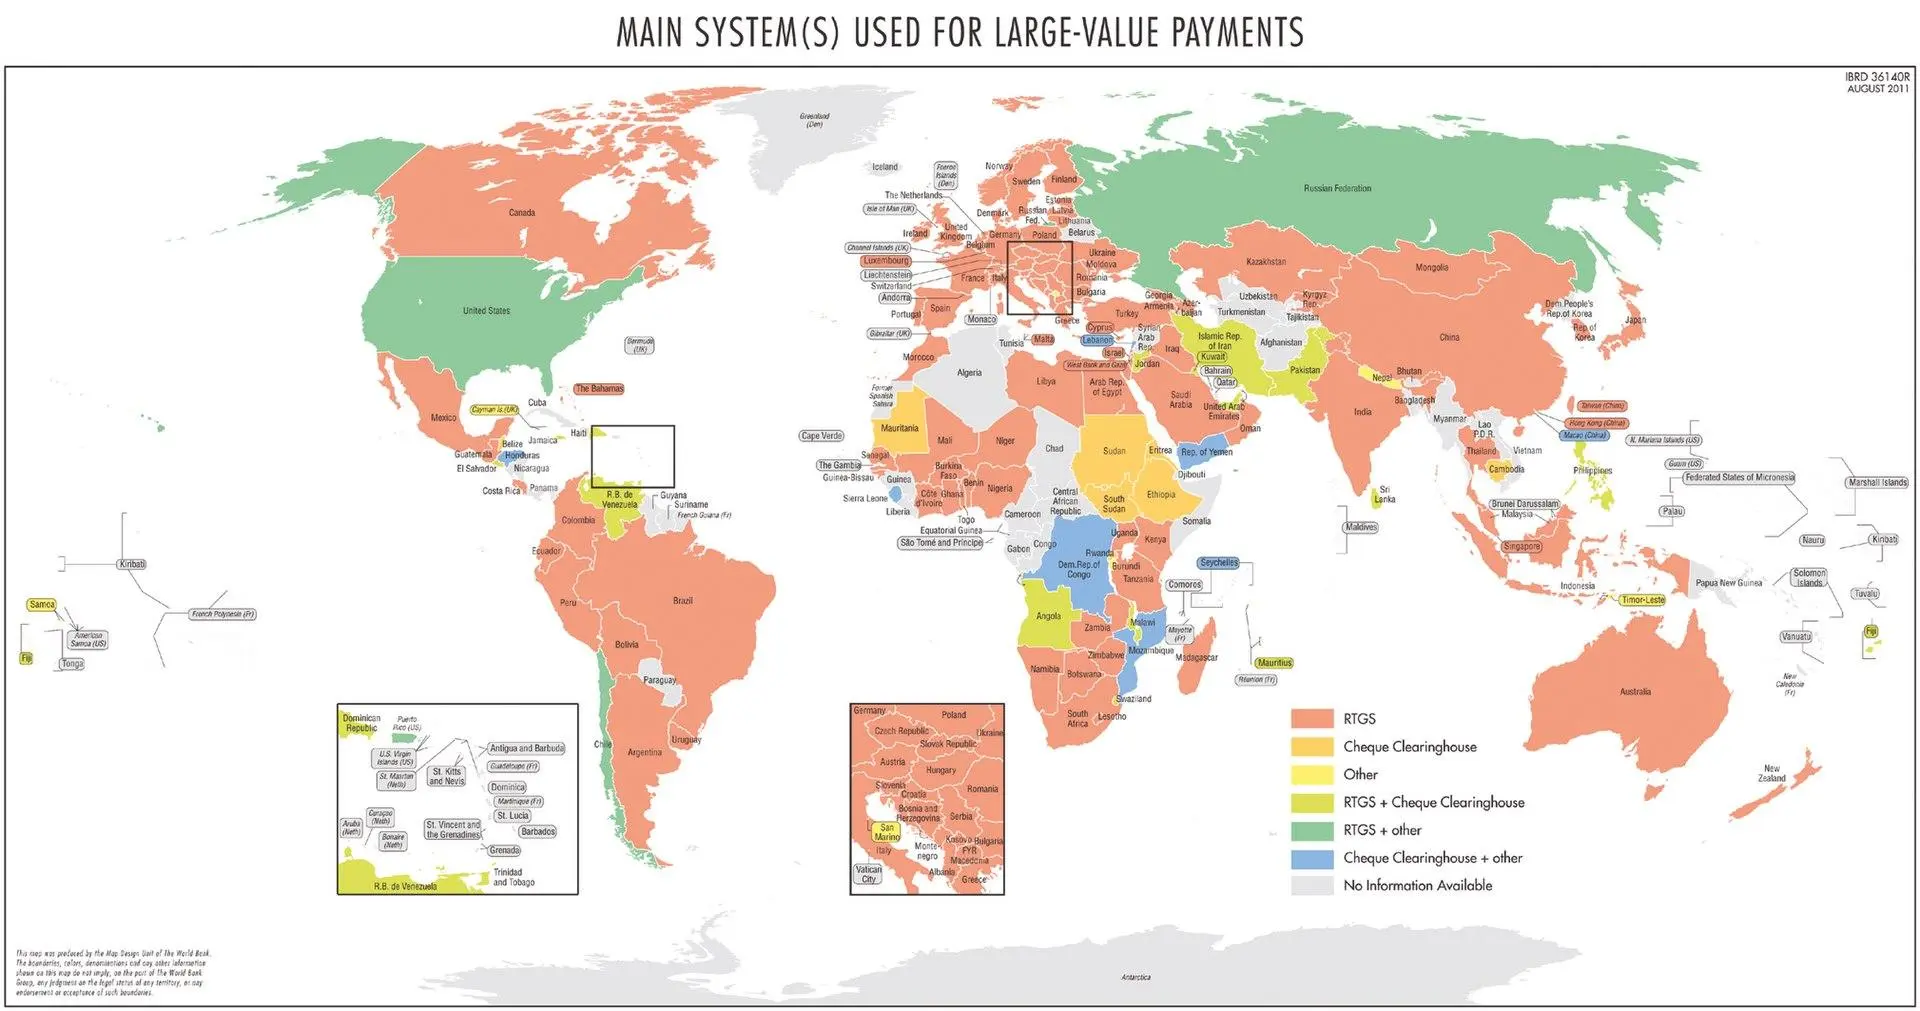 Main system used for large value payments